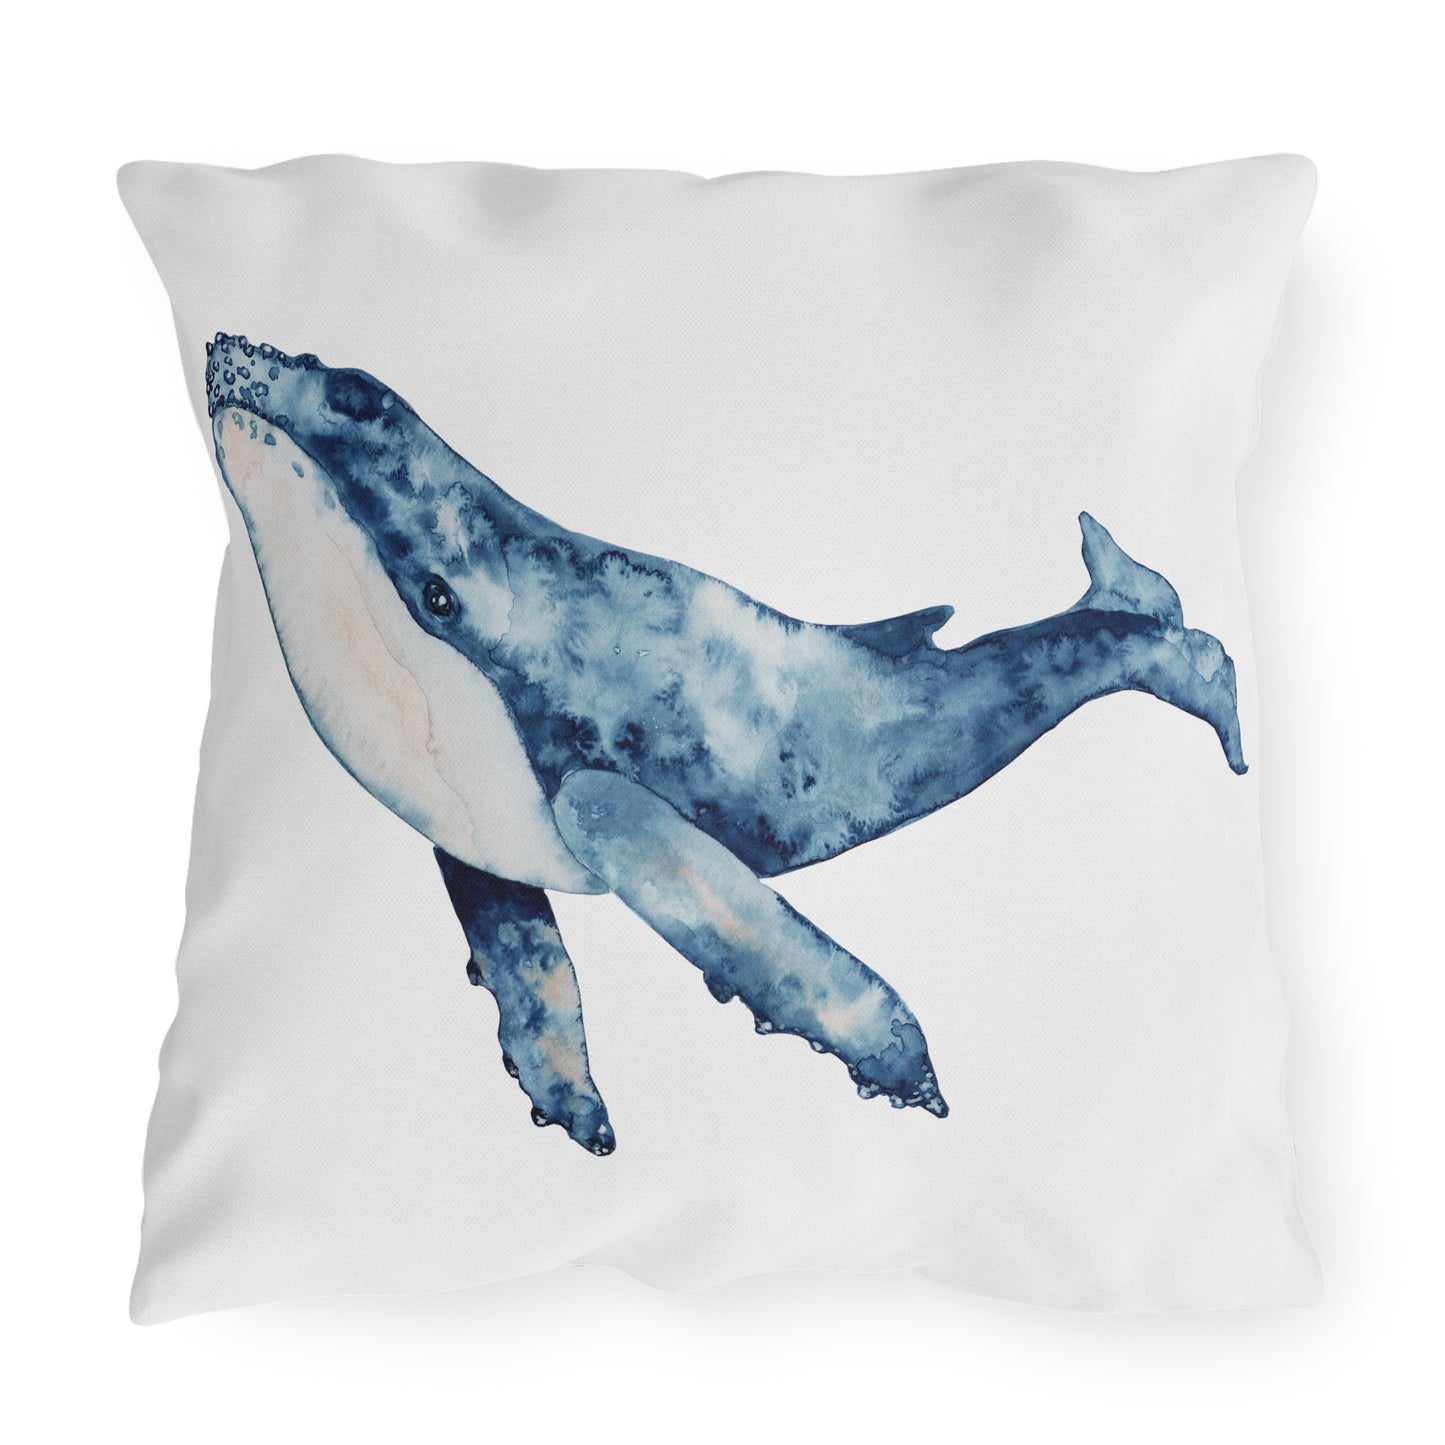 Whale Outdoor Pillow Watercolor Fish Lovers Coastal Beach Home Gift